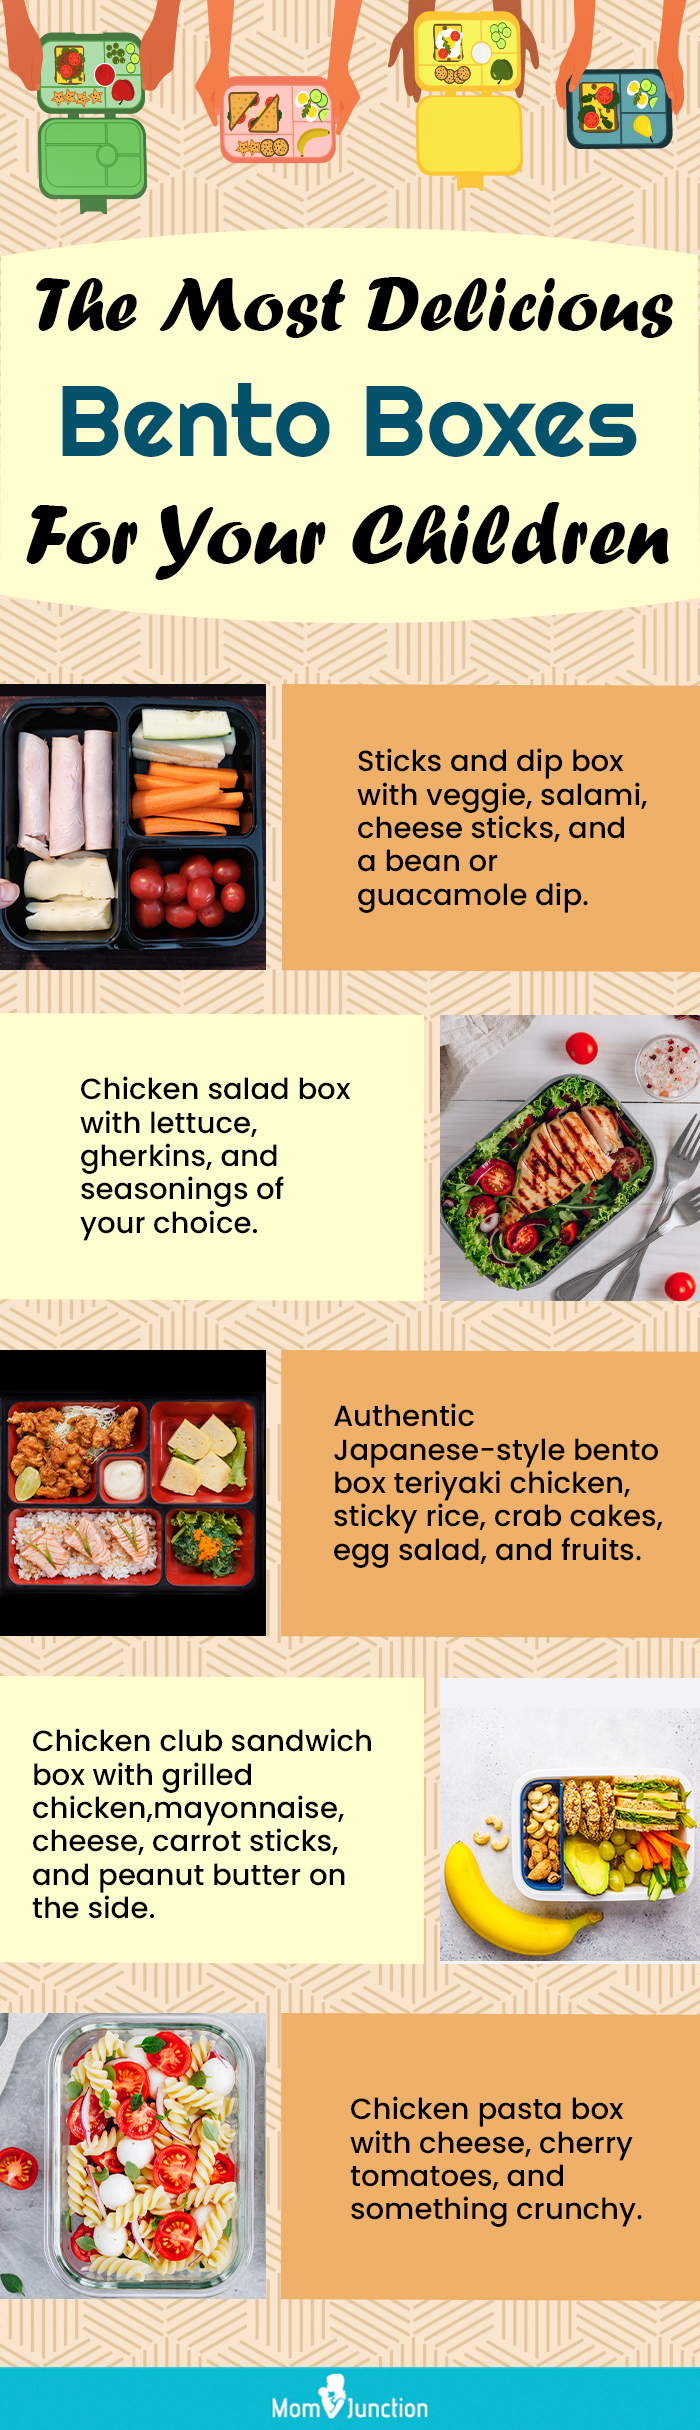 the most delicious bento boxes for your children [infographic]